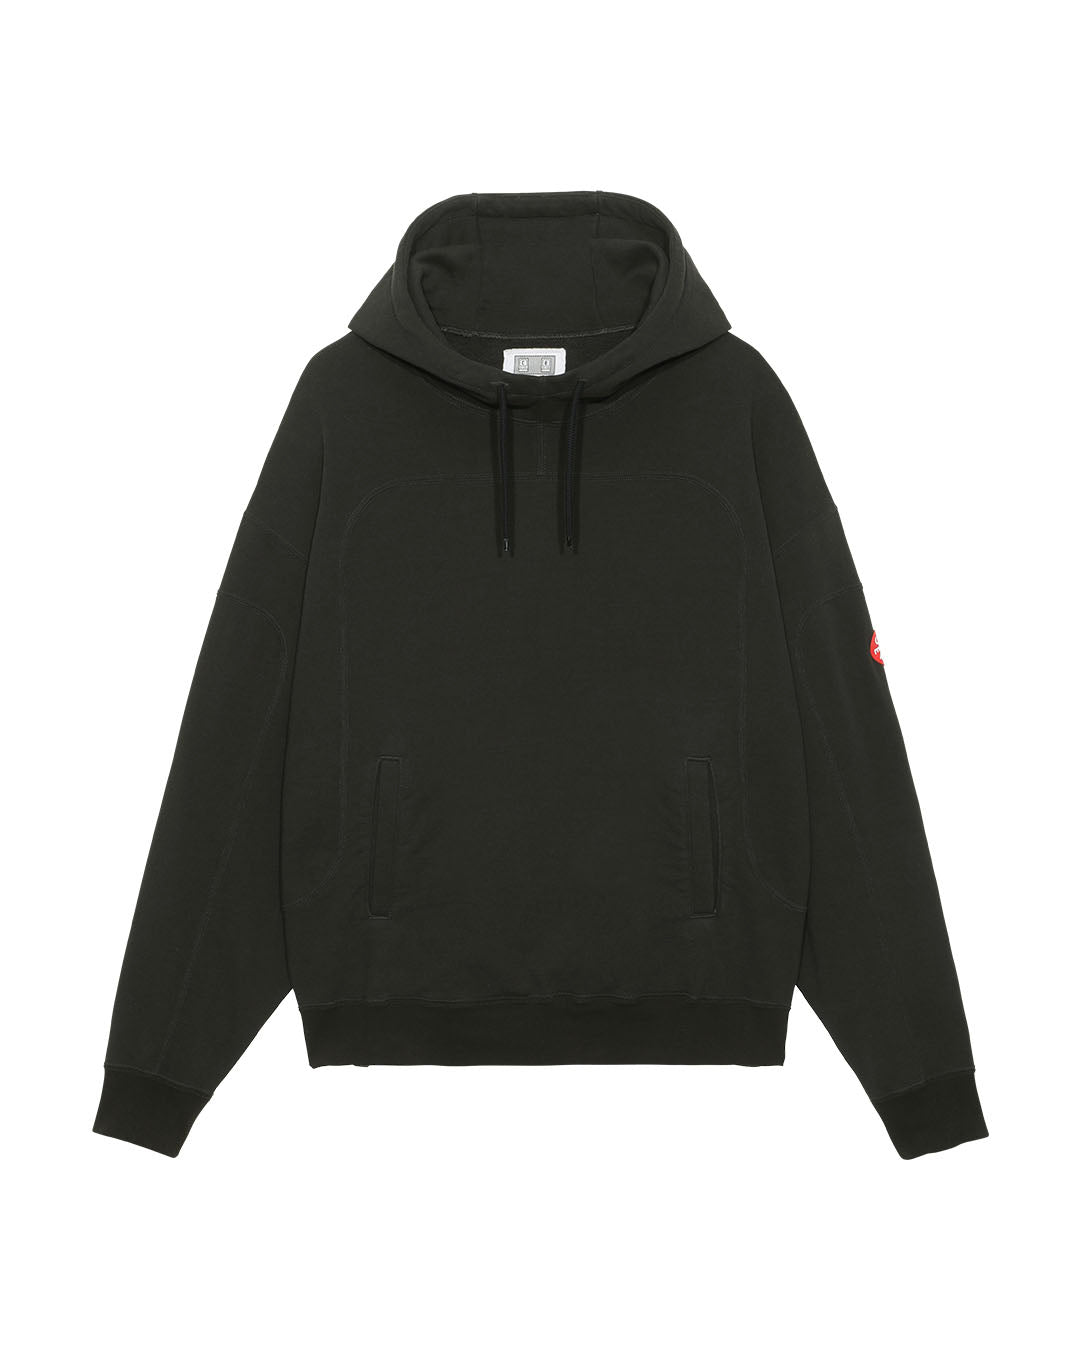 【C.E】CURVED SWITCH HOODY - BLACK